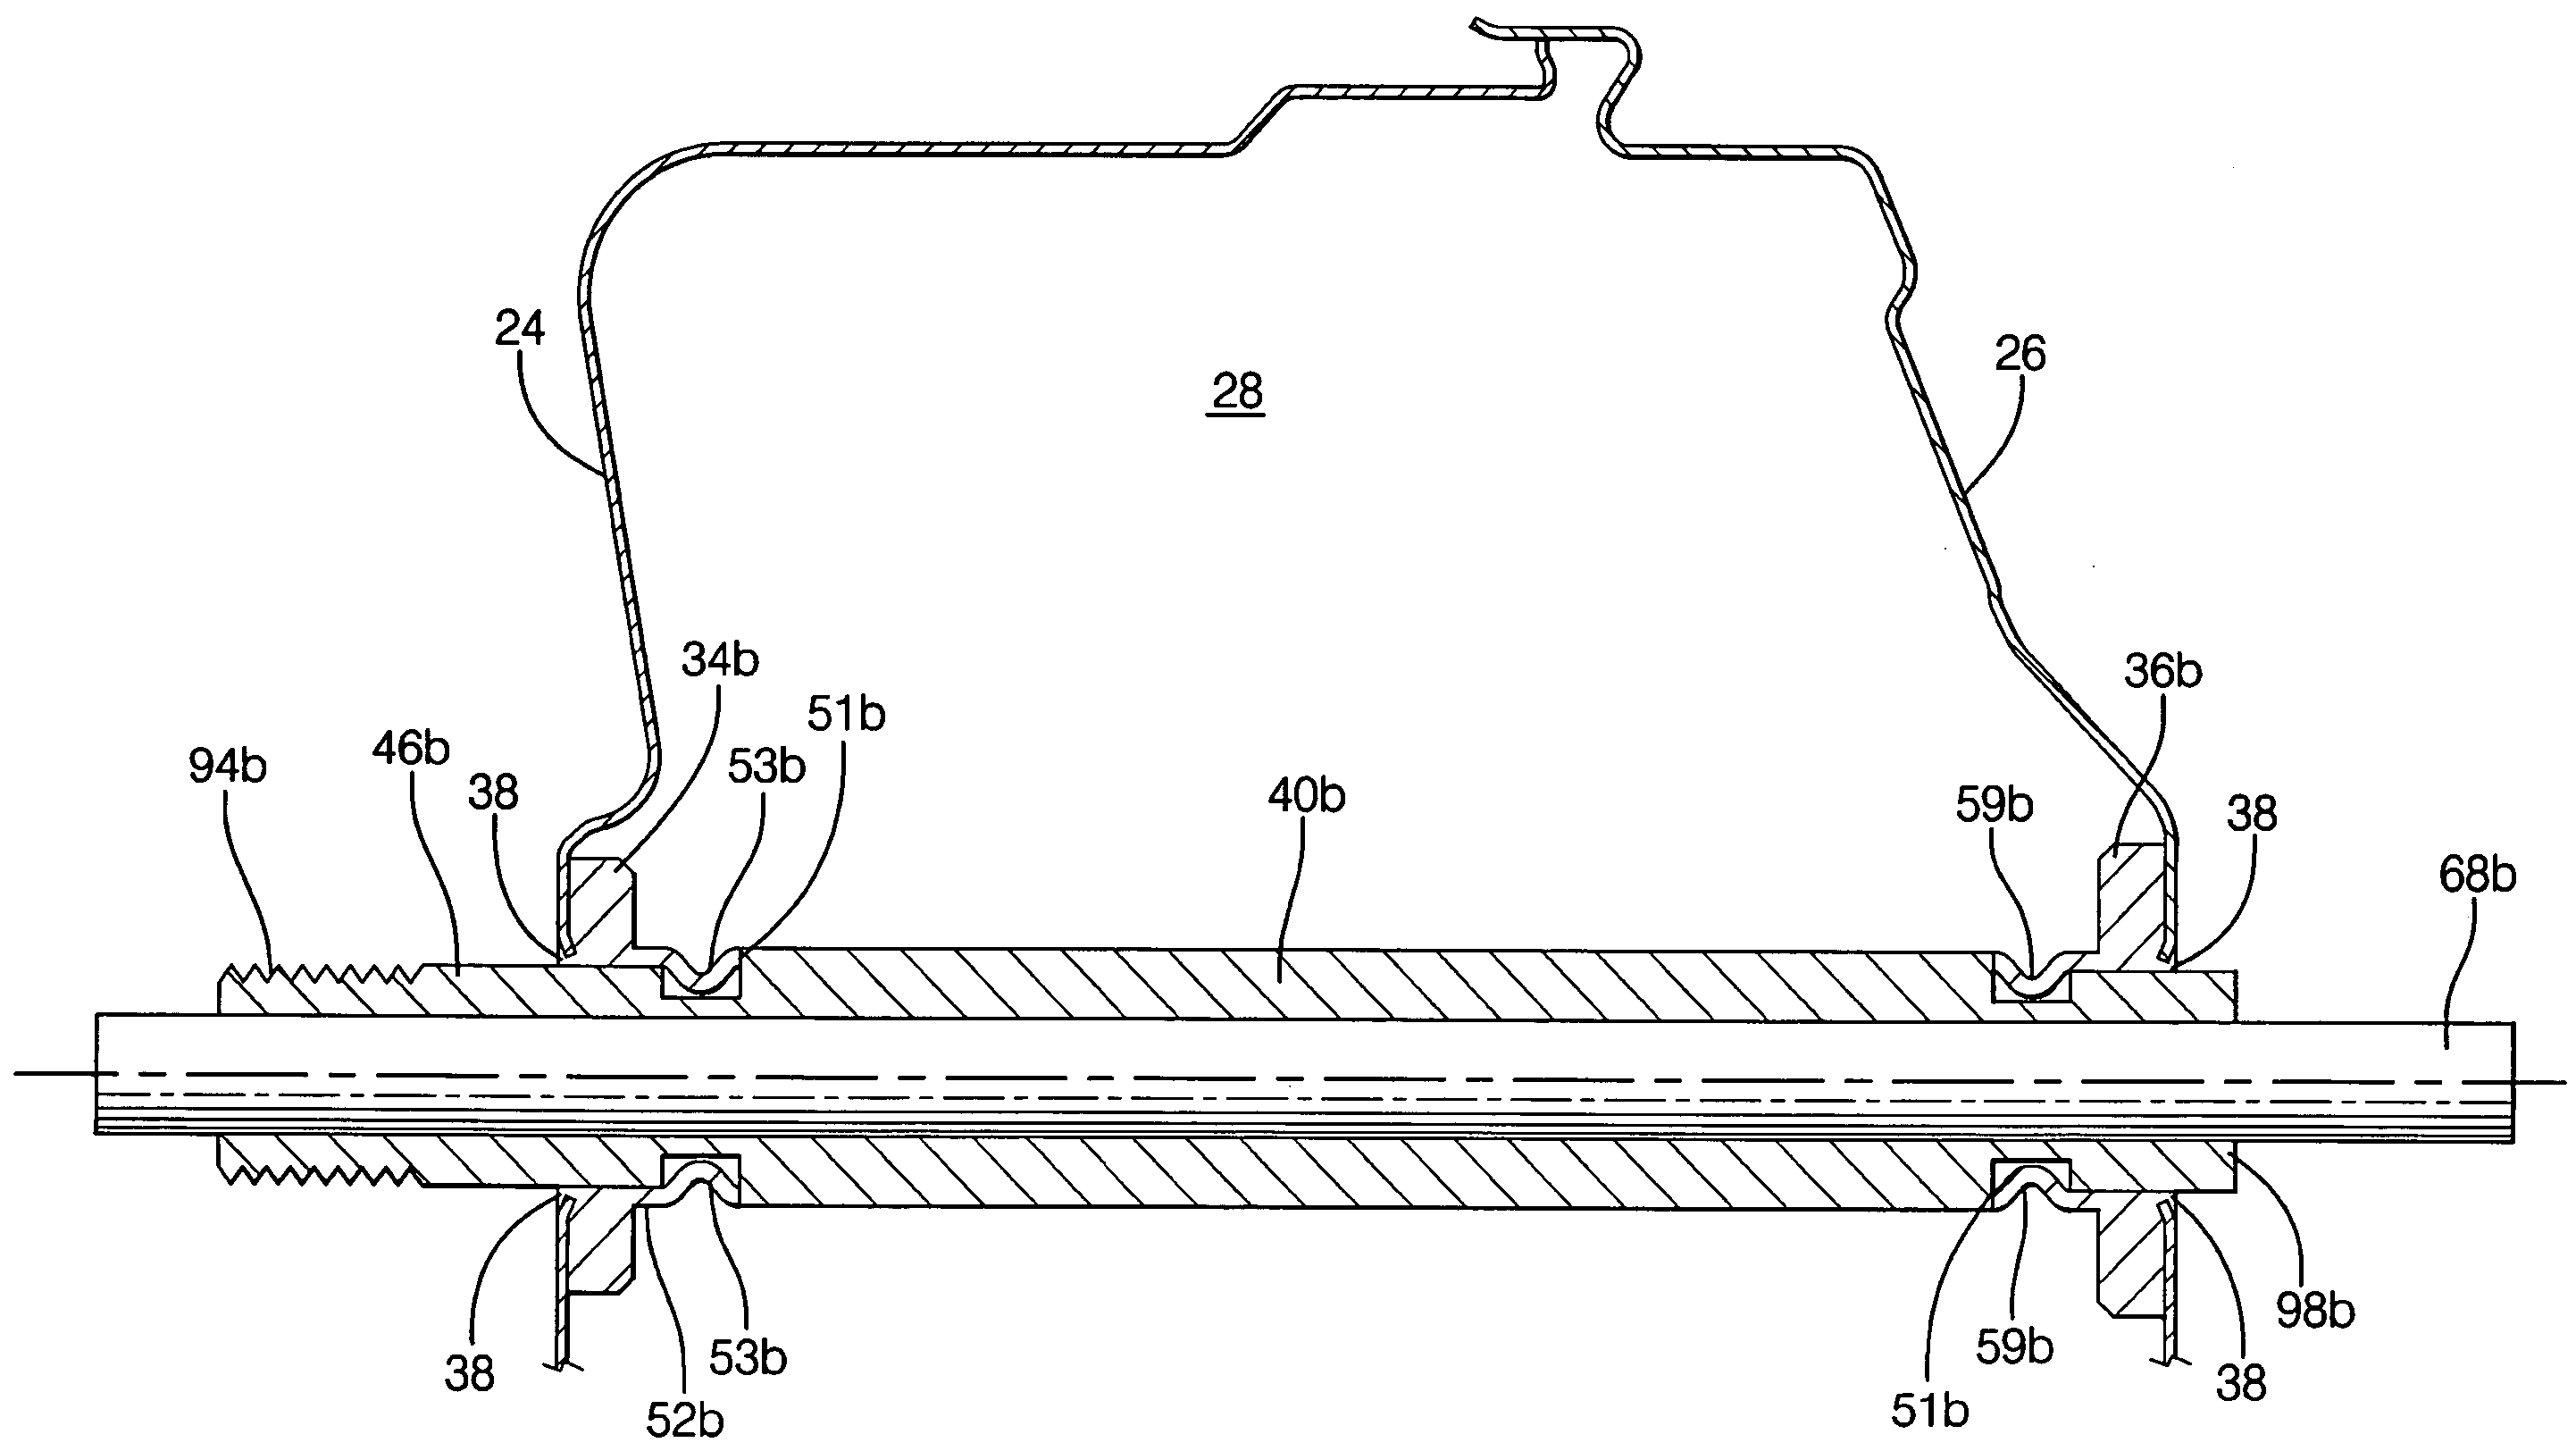 Brake booster with deformationally sealed passage and method of manufacture